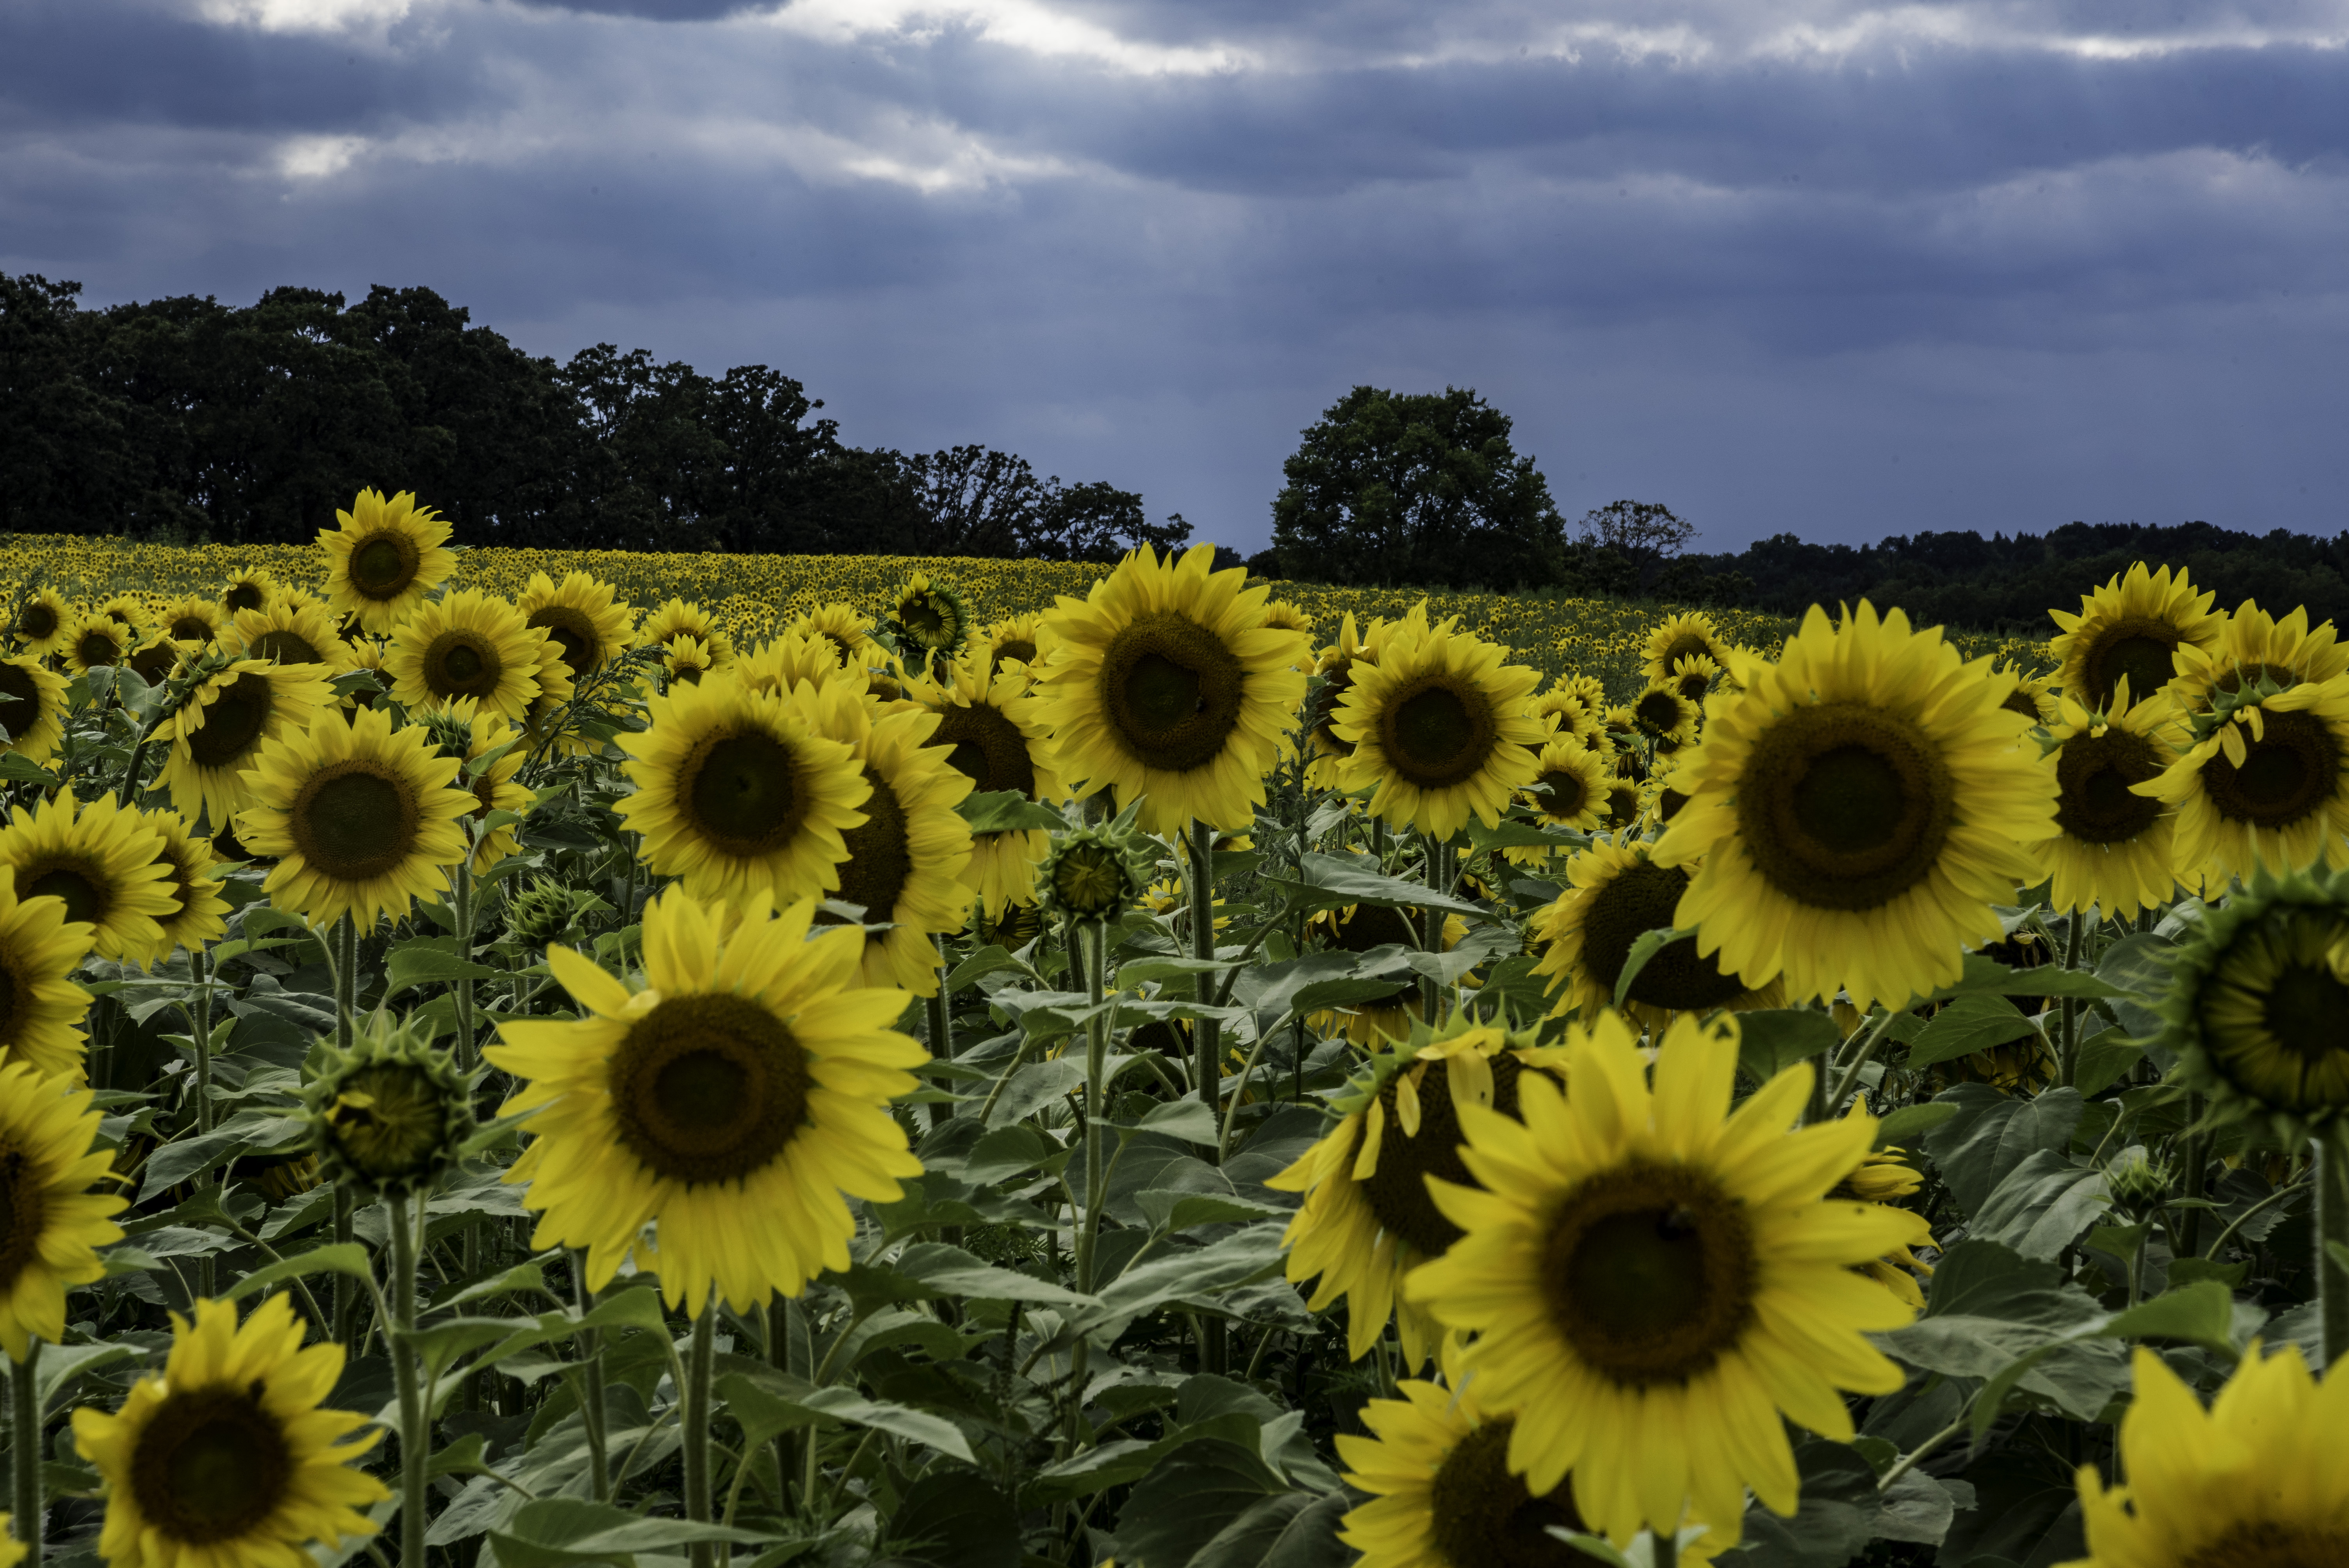 Large Sunflowers blooming at the Pope Conservancy Farm image - Free ...